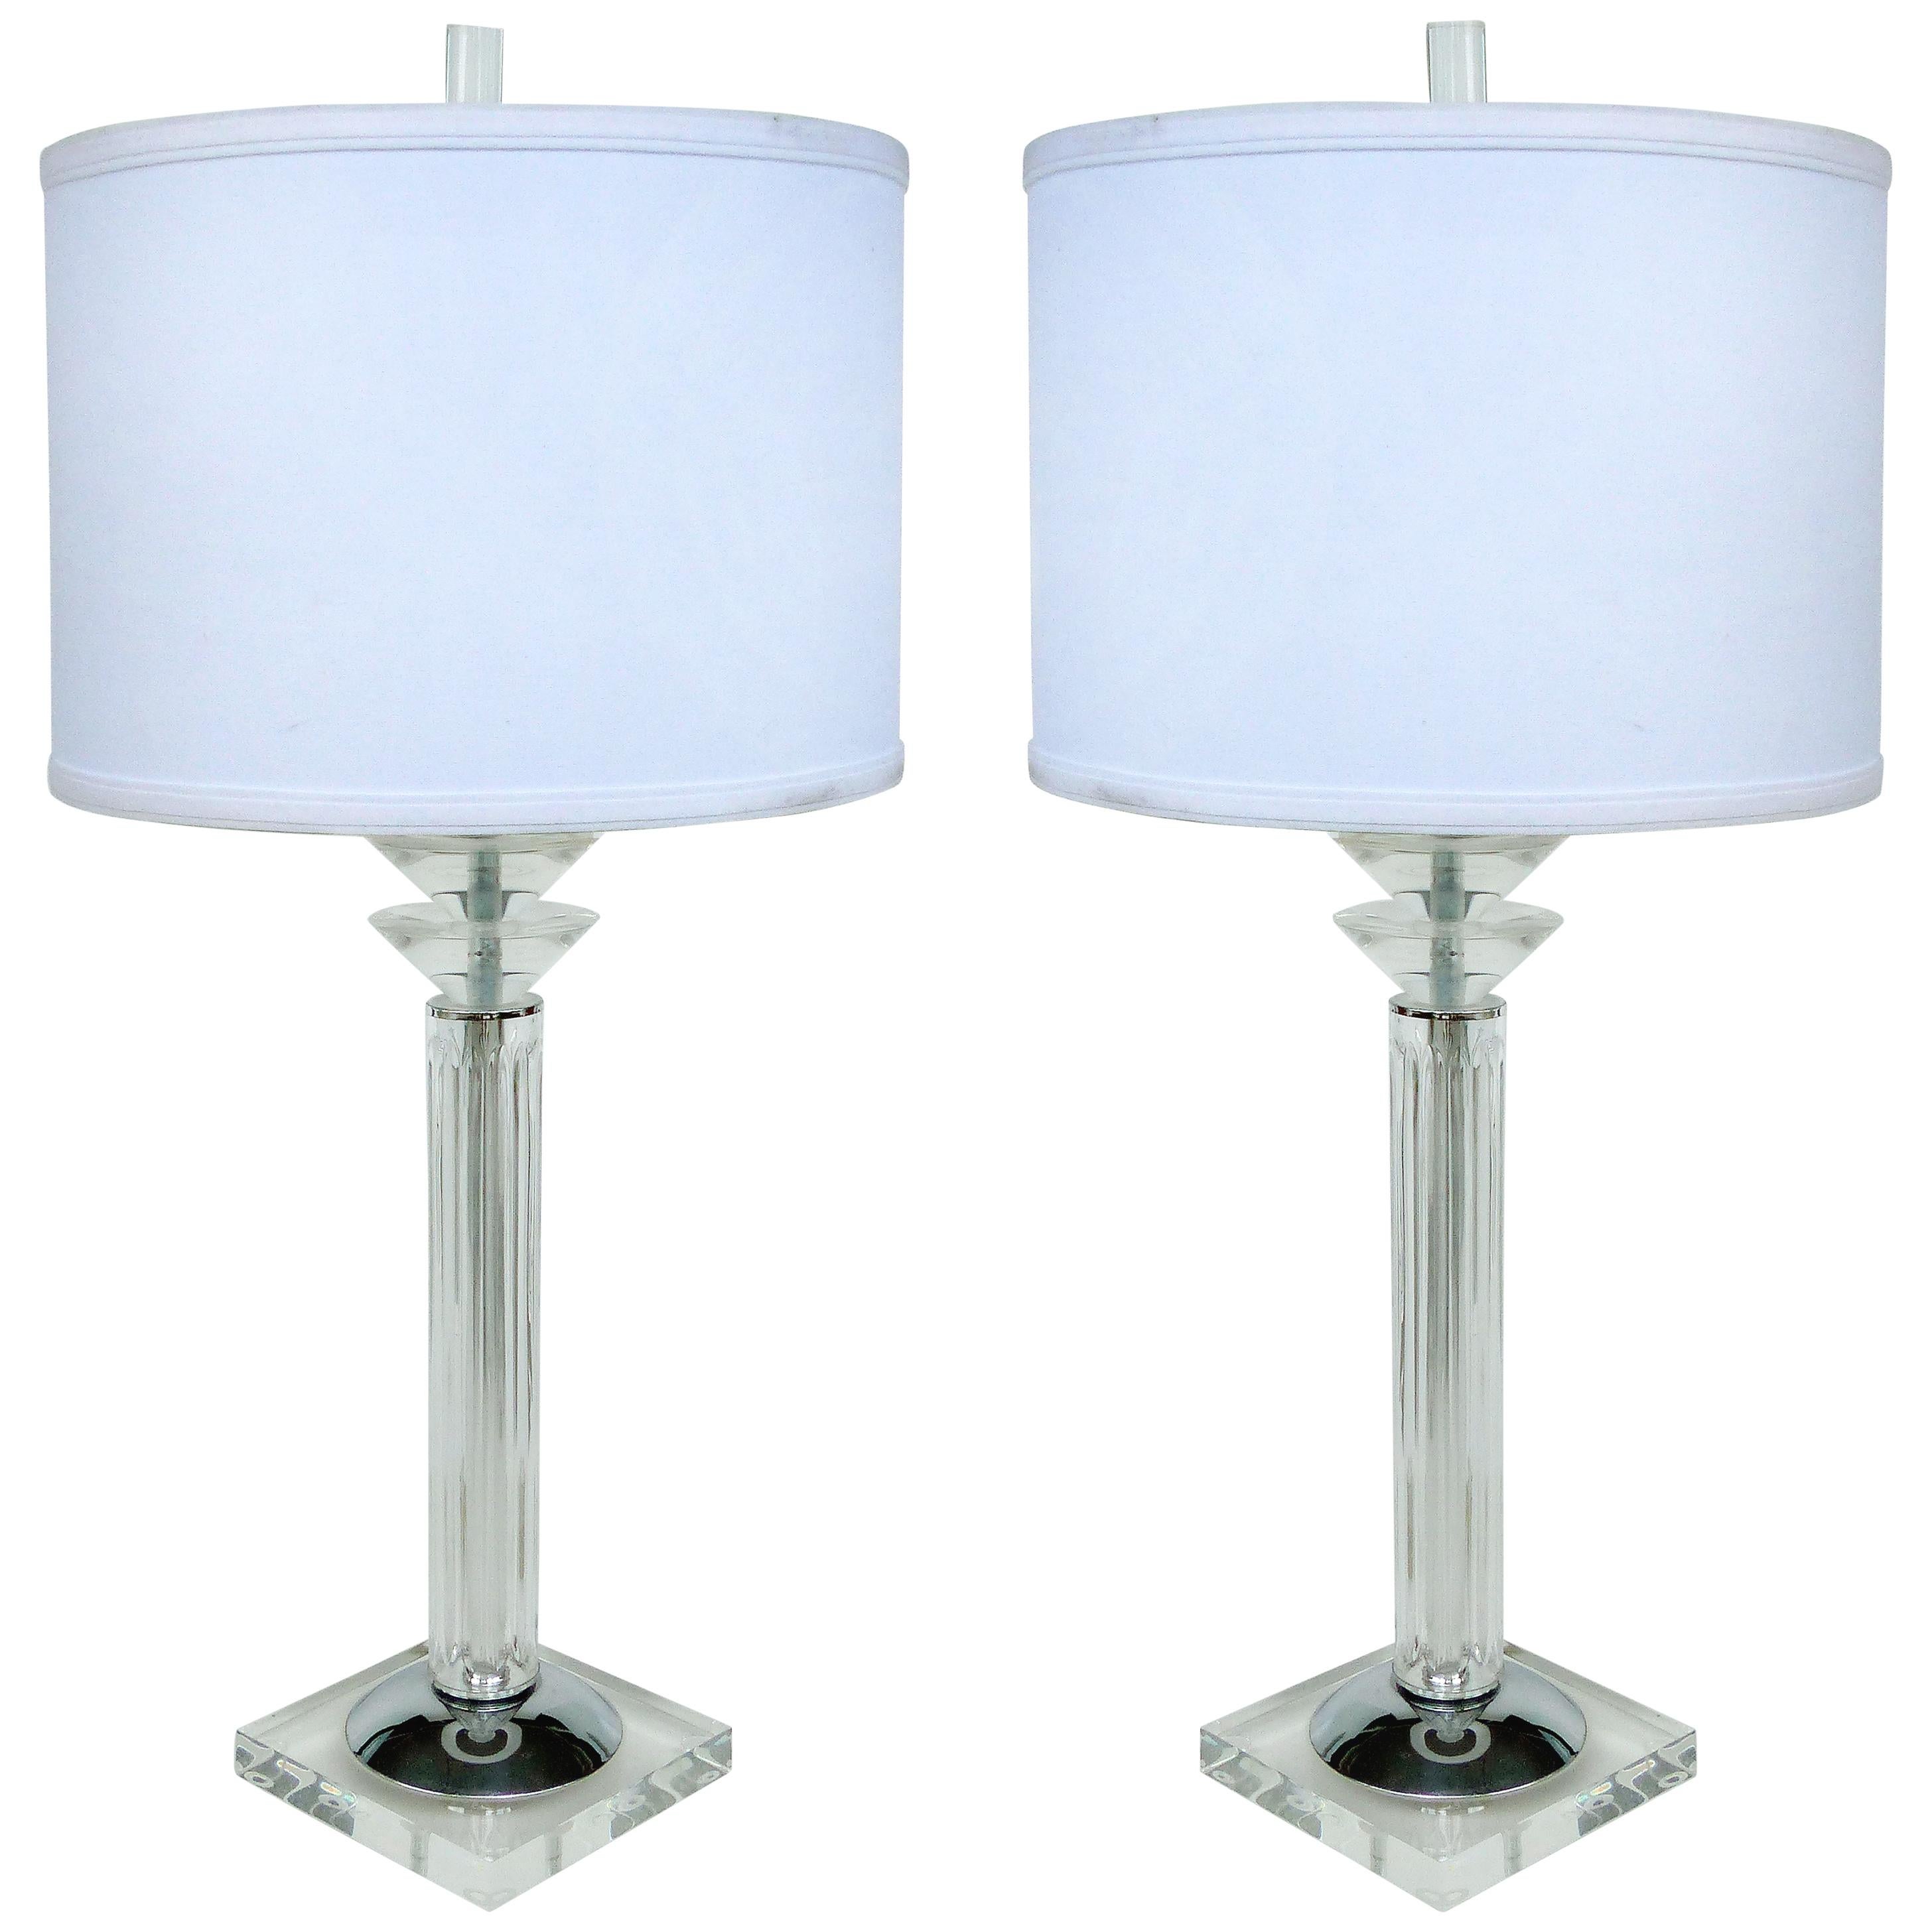 Bauer Lamp Company Lucite, Chrome and Glass Table Lamps, 1993